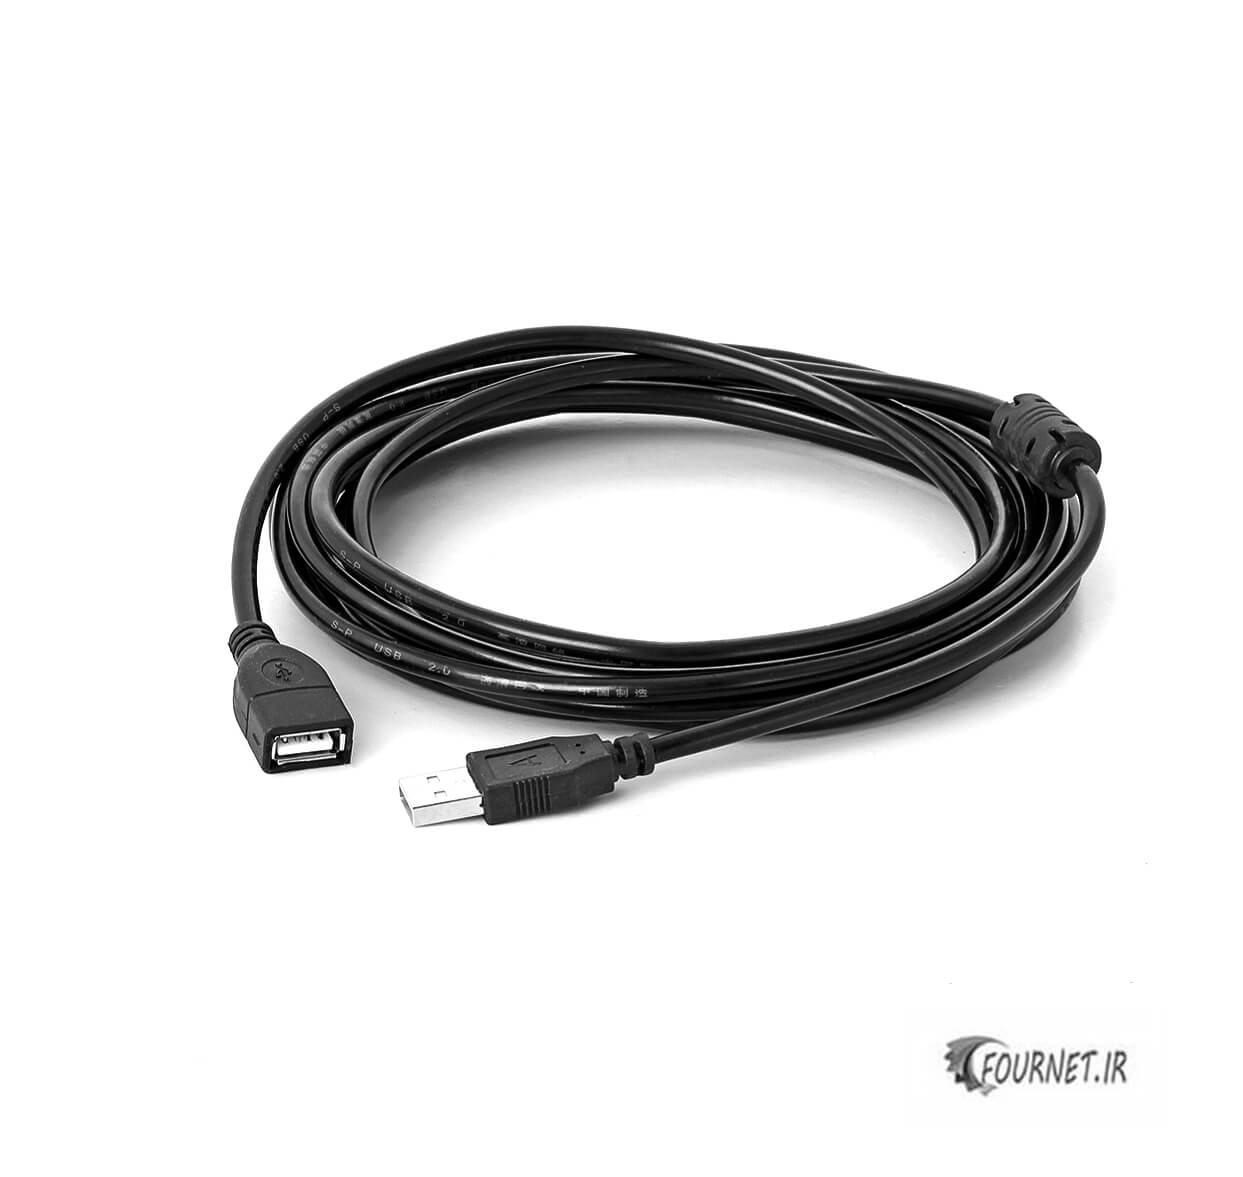 USB extension cable 5M Enet